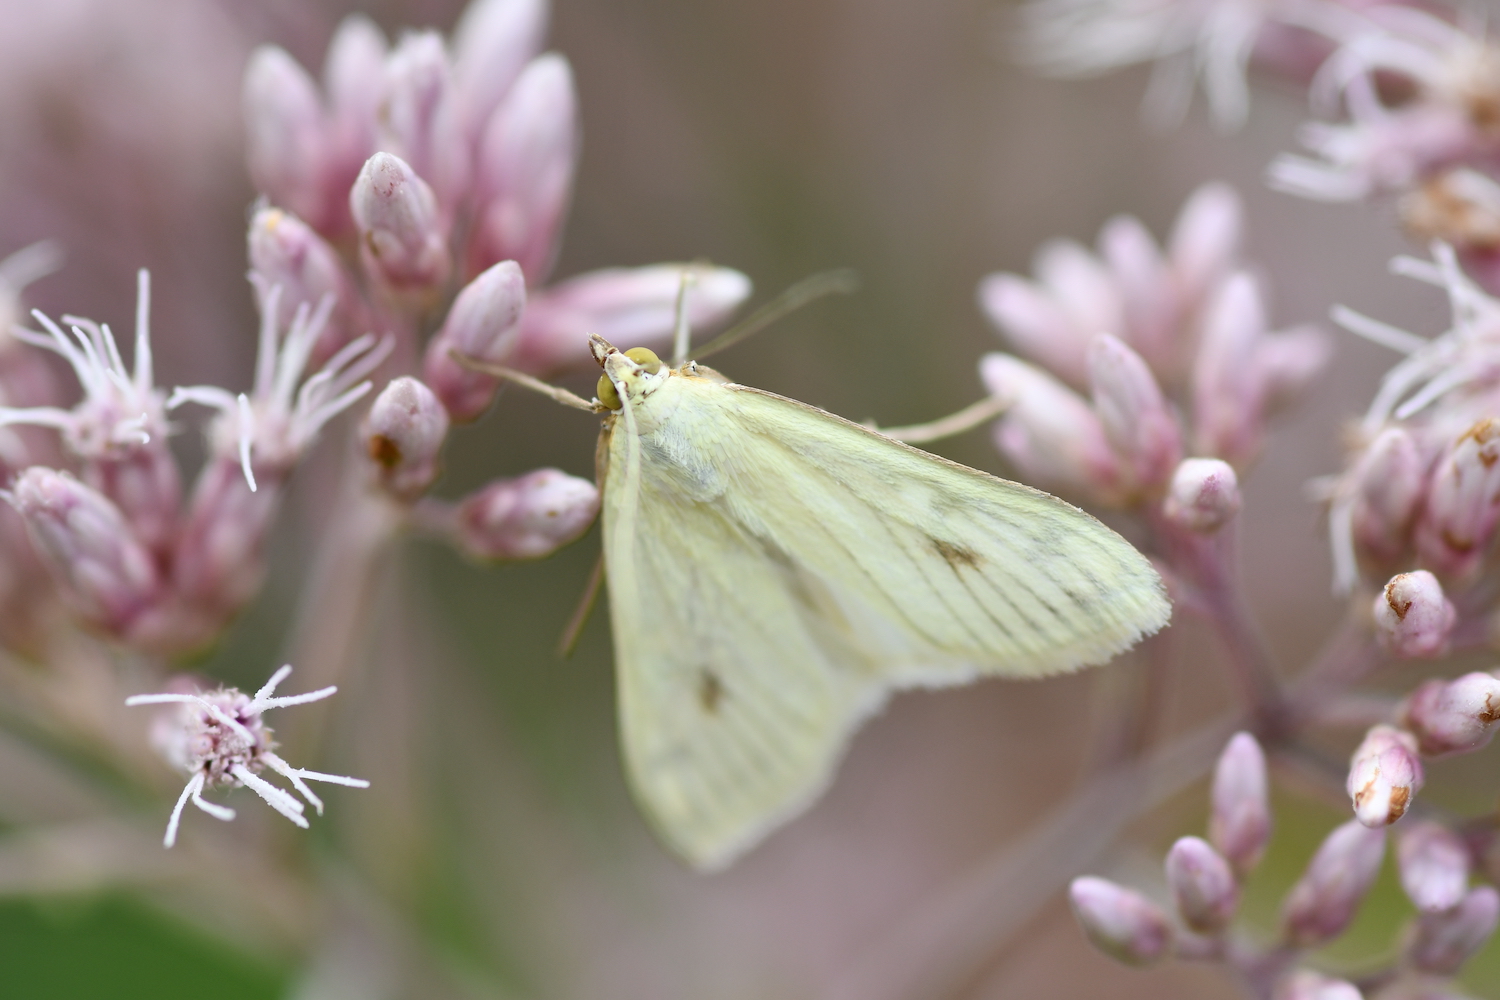 A carrot seed moth on a pink flower.